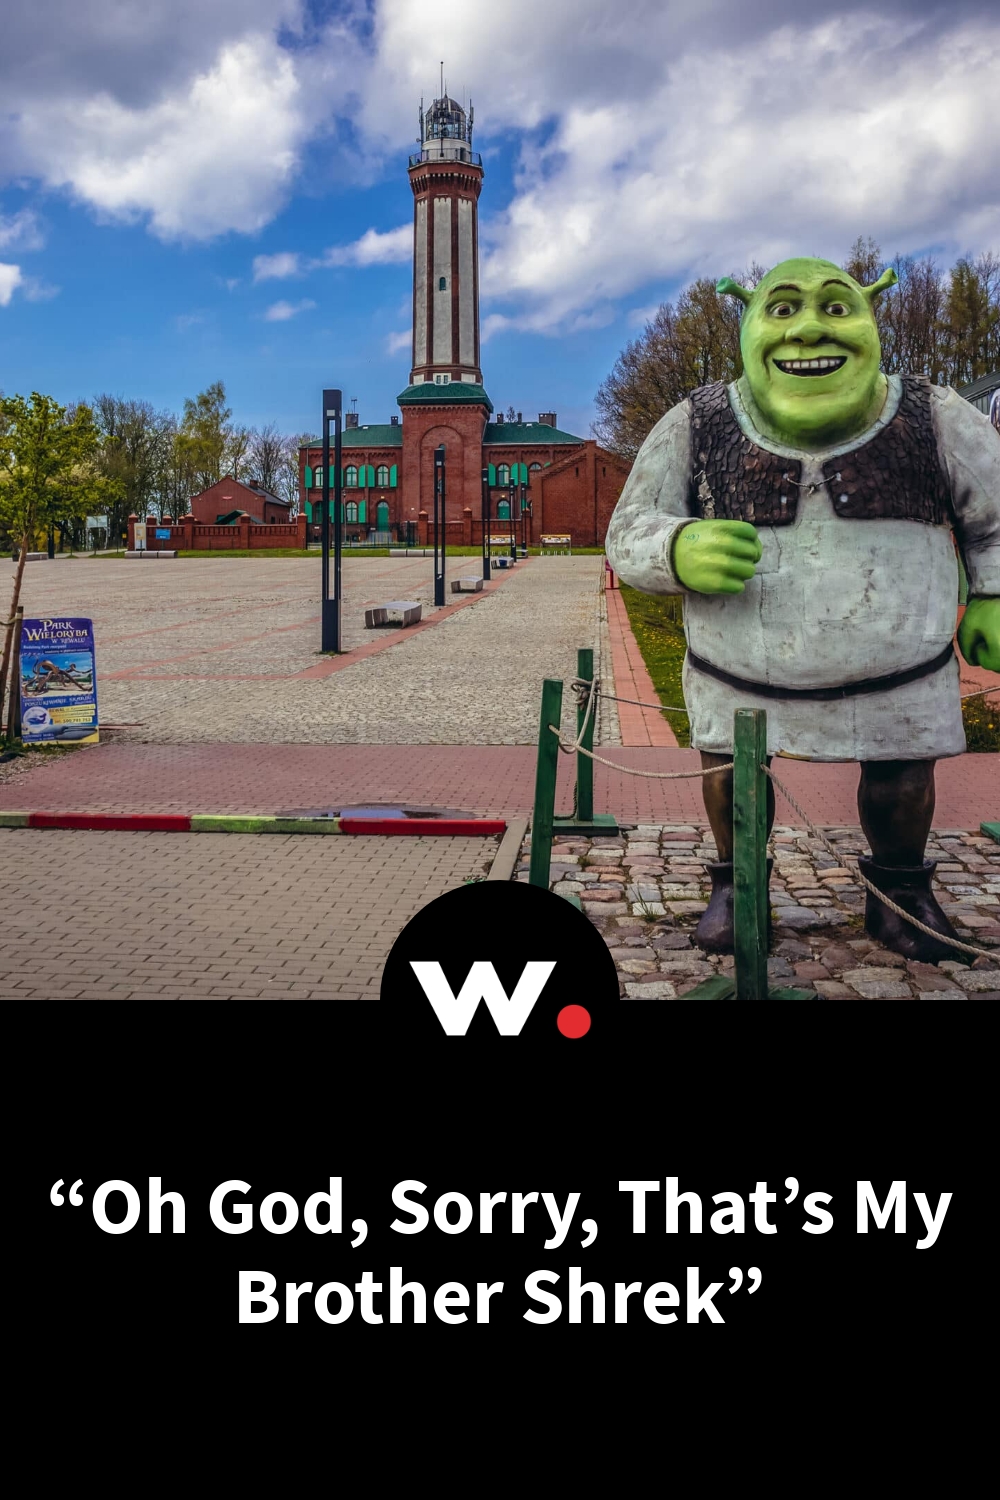 “Oh God, Sorry, That’s My Brother Shrek”